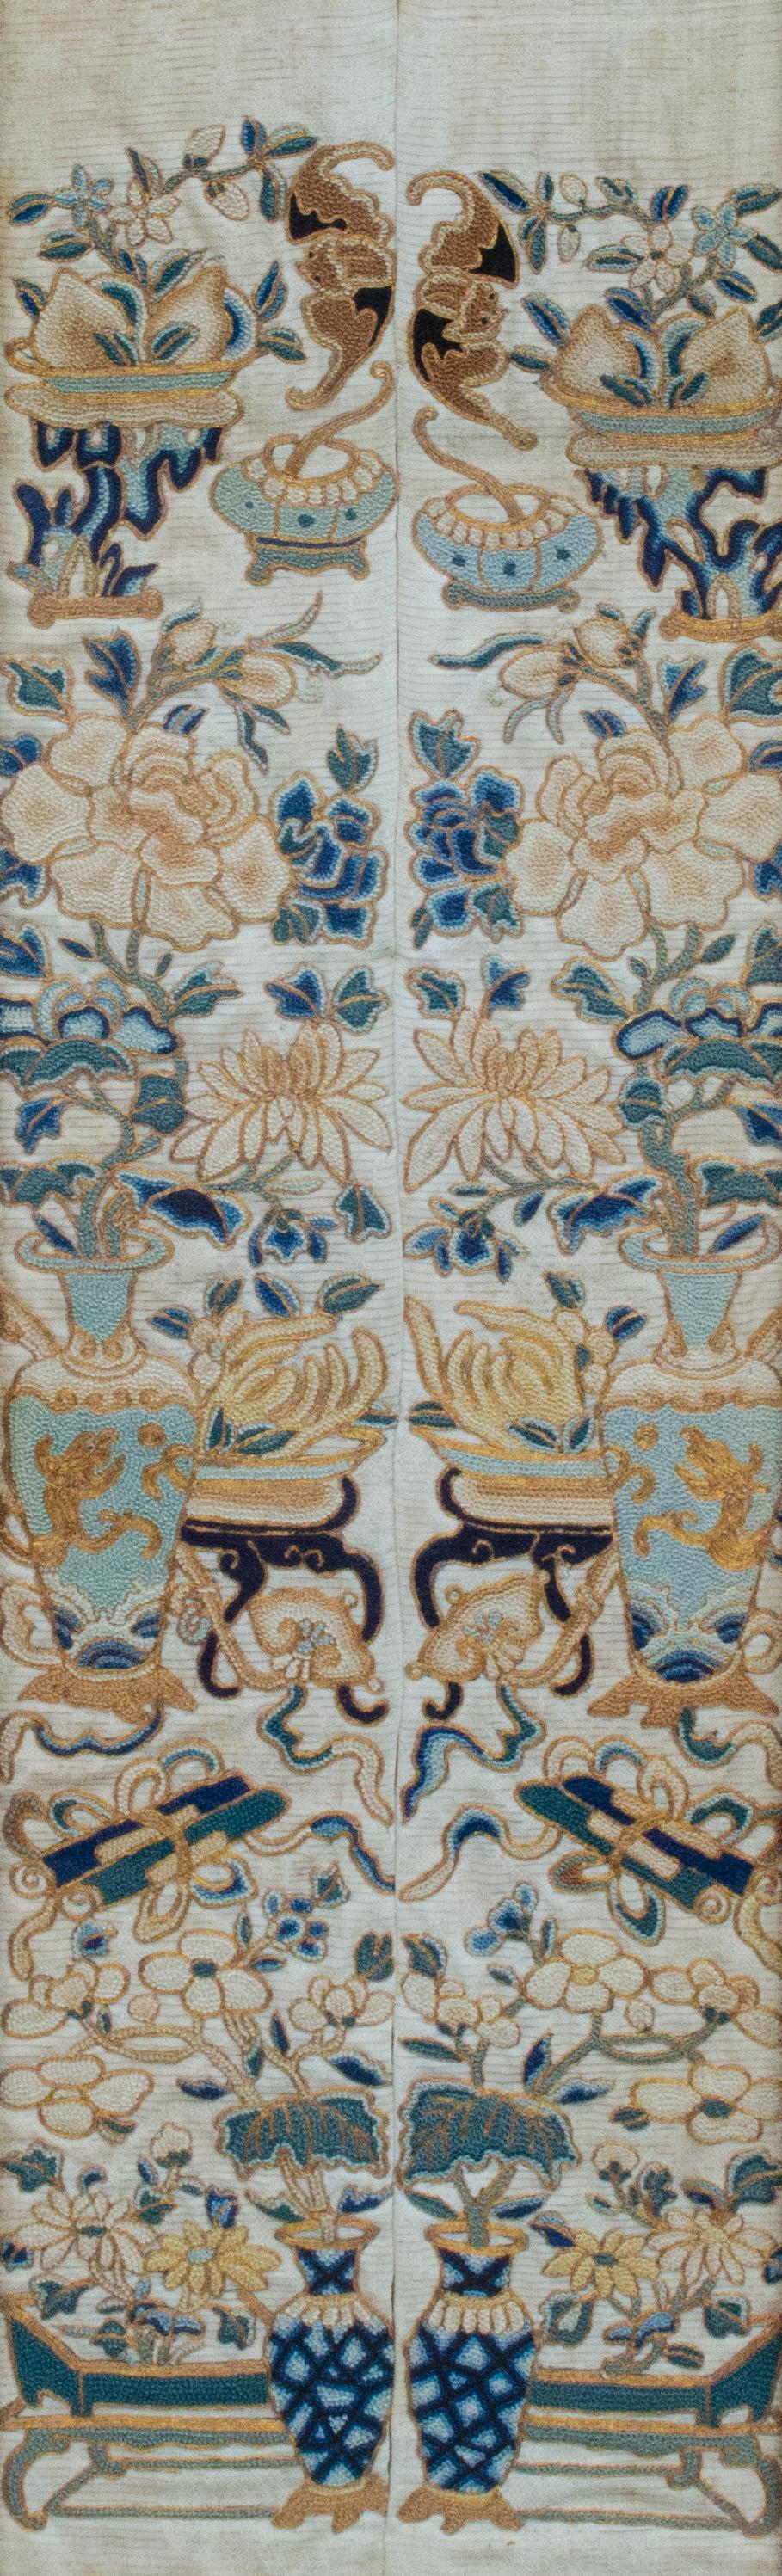 Qing Dynasty Embroidered Textile